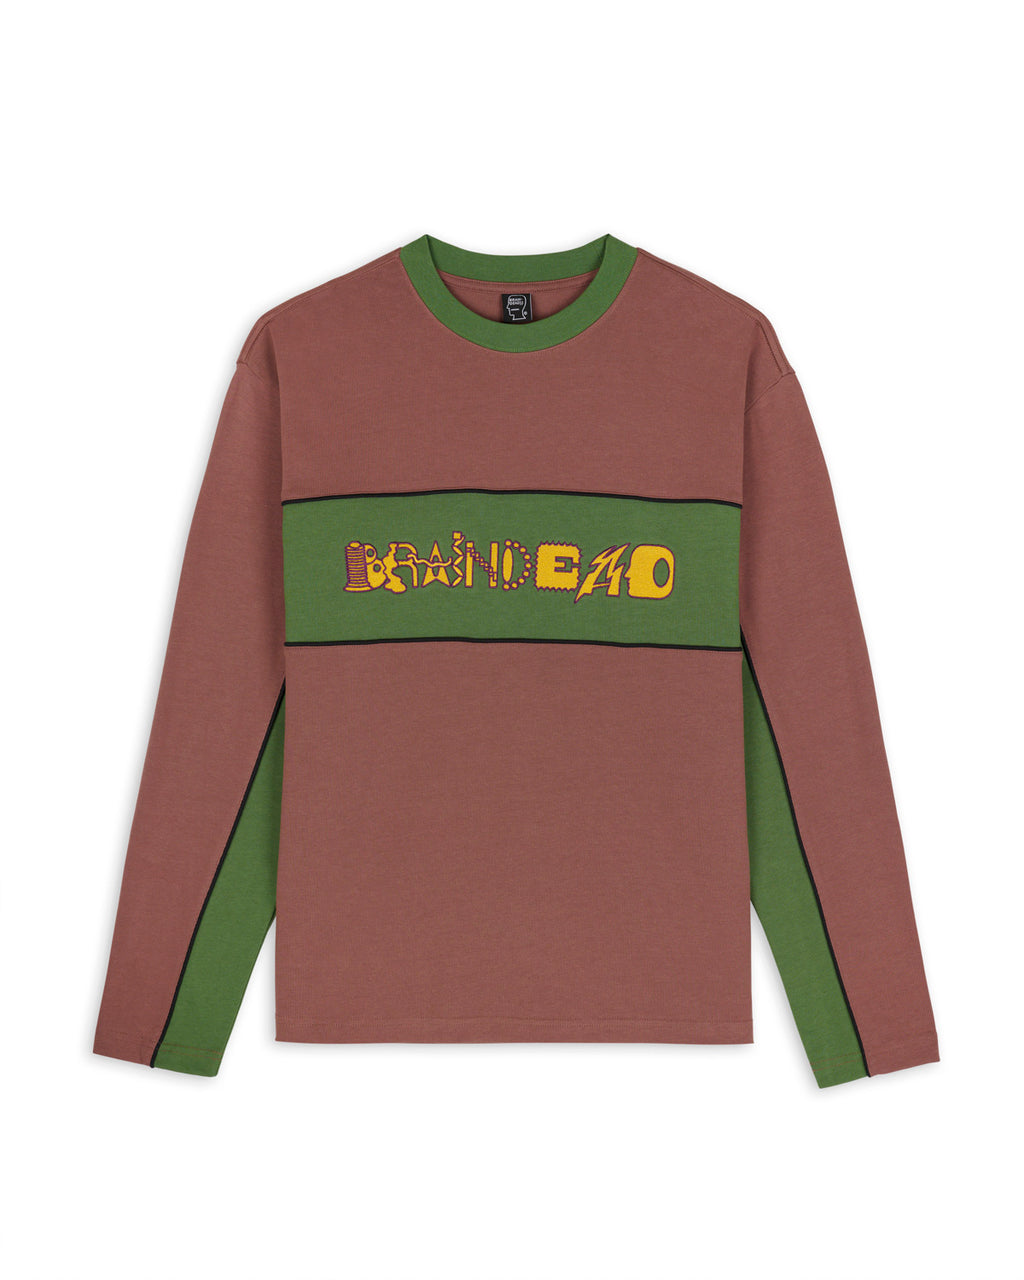 Connections Long Sleeve Football Shirt - Brown Multi 1